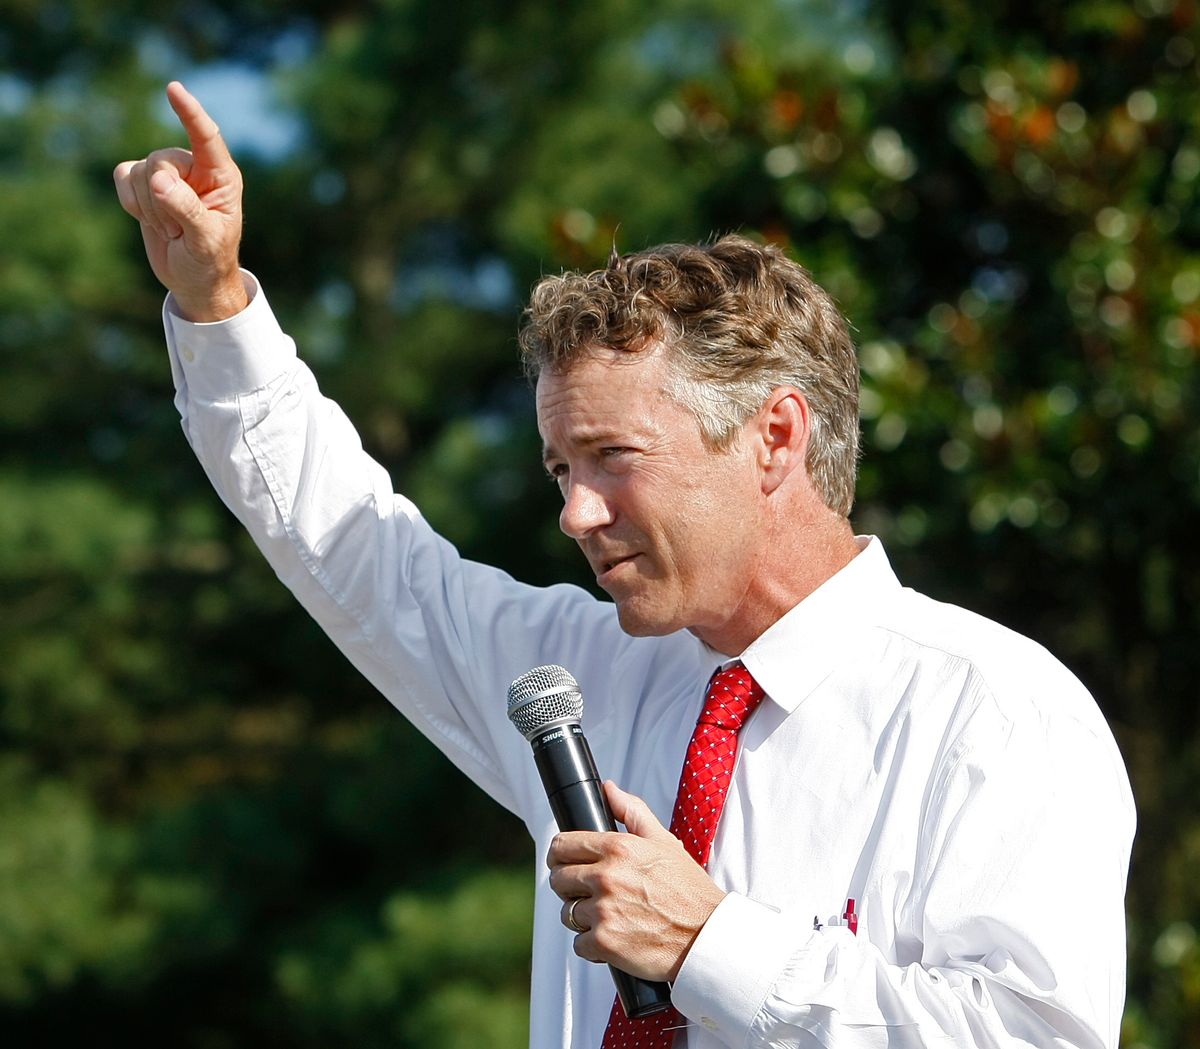 Republican U.S. Senate candidate Rand Paul speaks to a tea party rally in front of the Capitol in Frankfort, Ky., Saturday, July 10, 2010.  (AP Photo/Ed Reinke) (Ed Reinke)